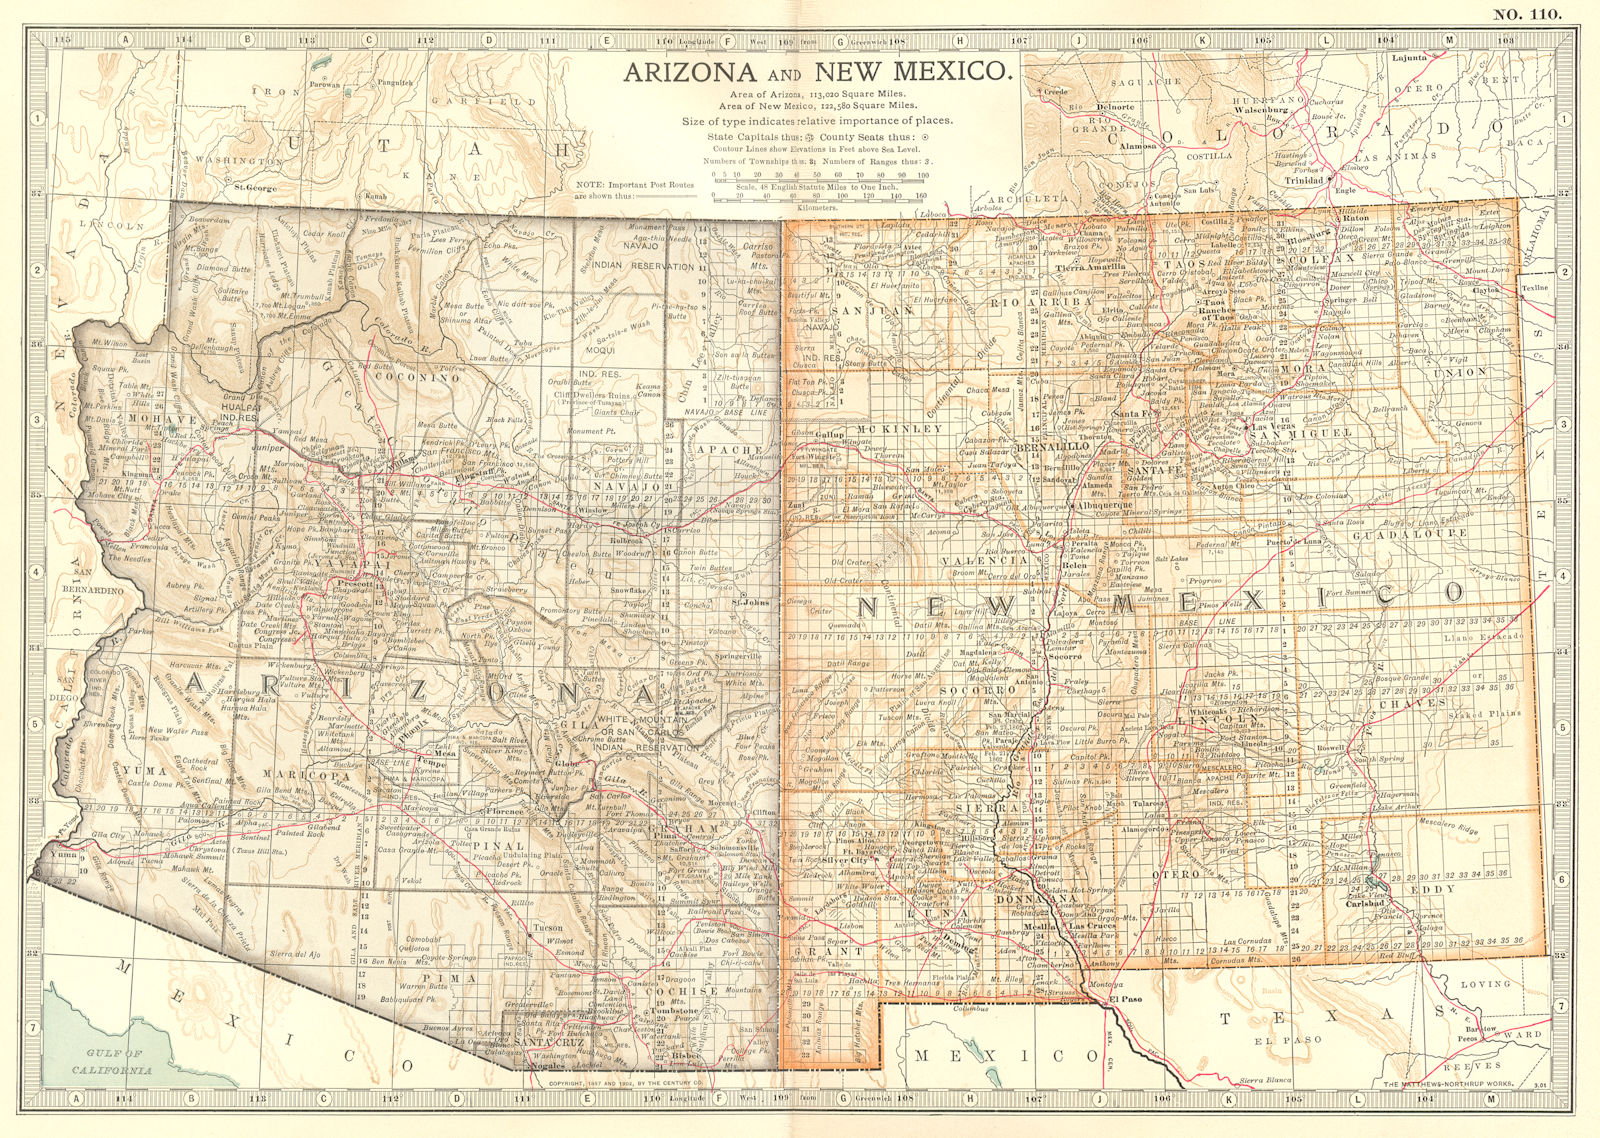 ARIZONA & NEW MEXICO. State map showing counties. Britannica 10th ed. 1903